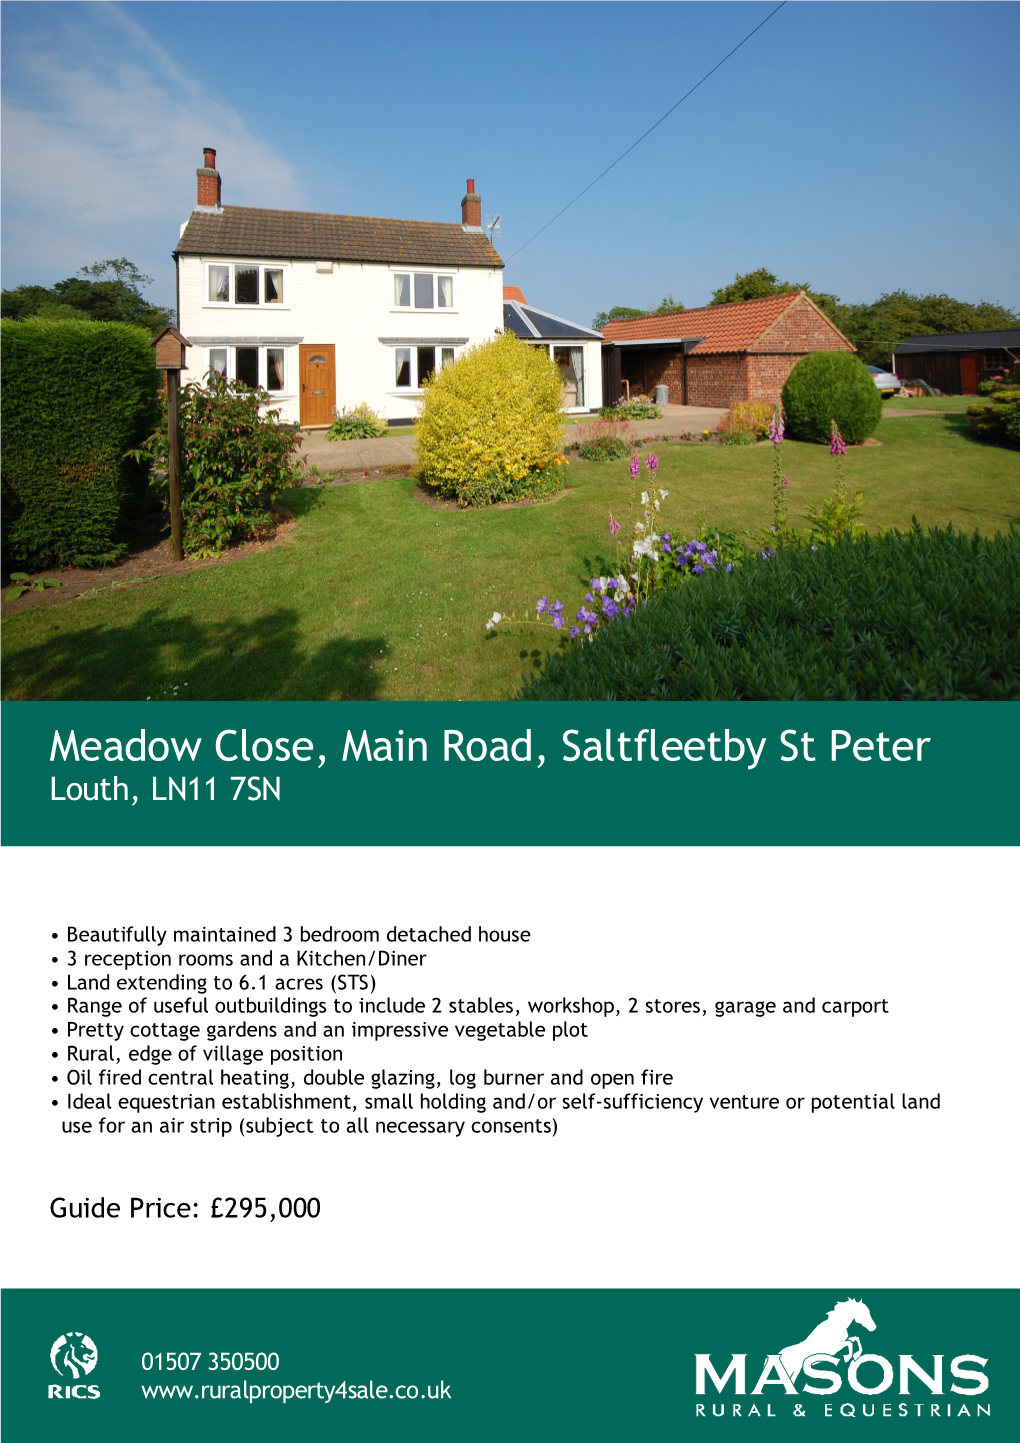 Meadow Close, Main Road, Saltfleetby St Peter Louth, LN11 7SN